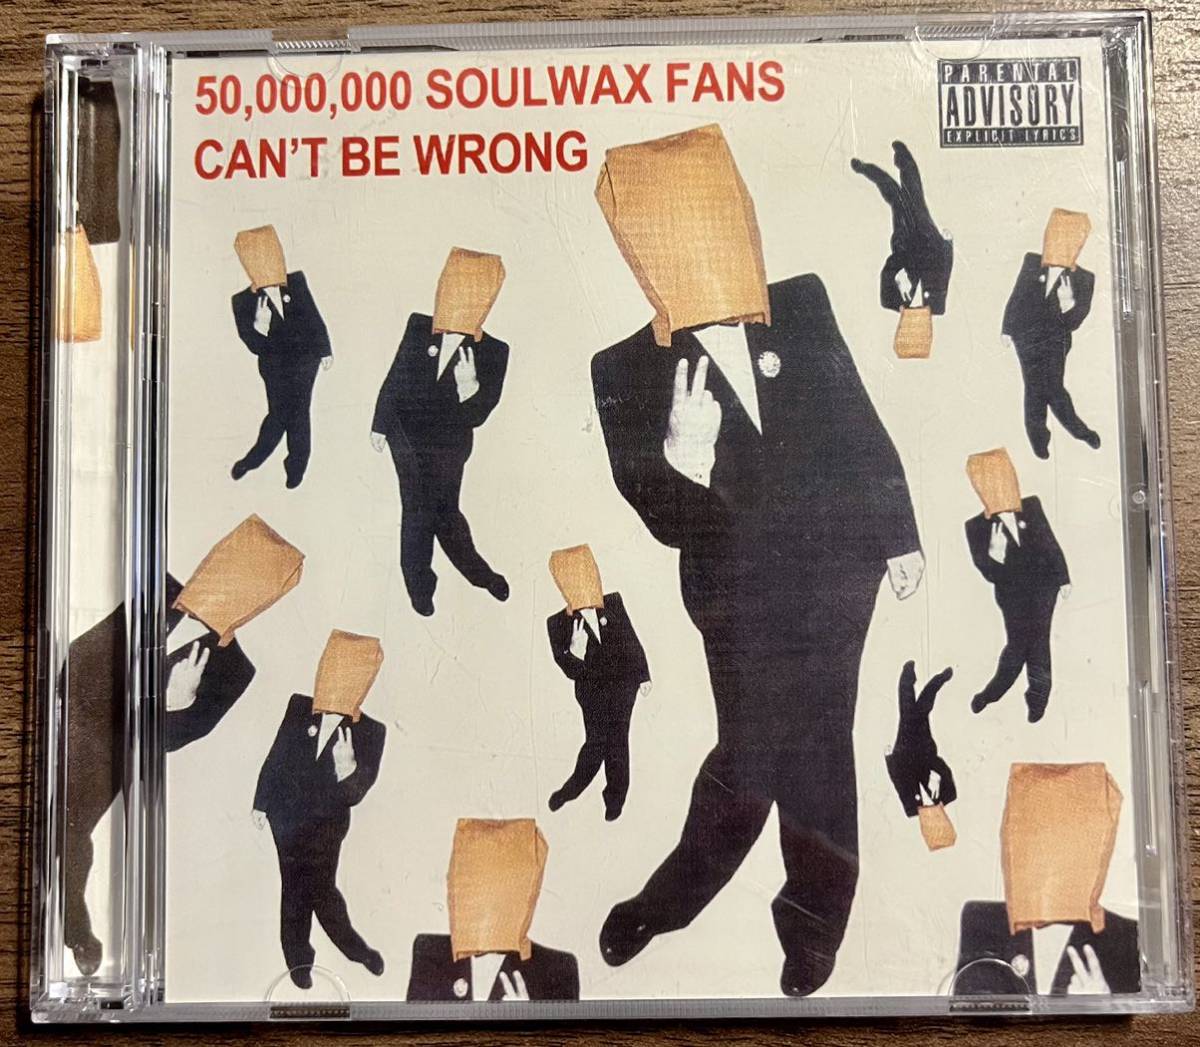 2 many dj's 50,000,000 SOULWAX FANS CAN'T BE WRONG MIX CD mixcd 2枚組_画像1